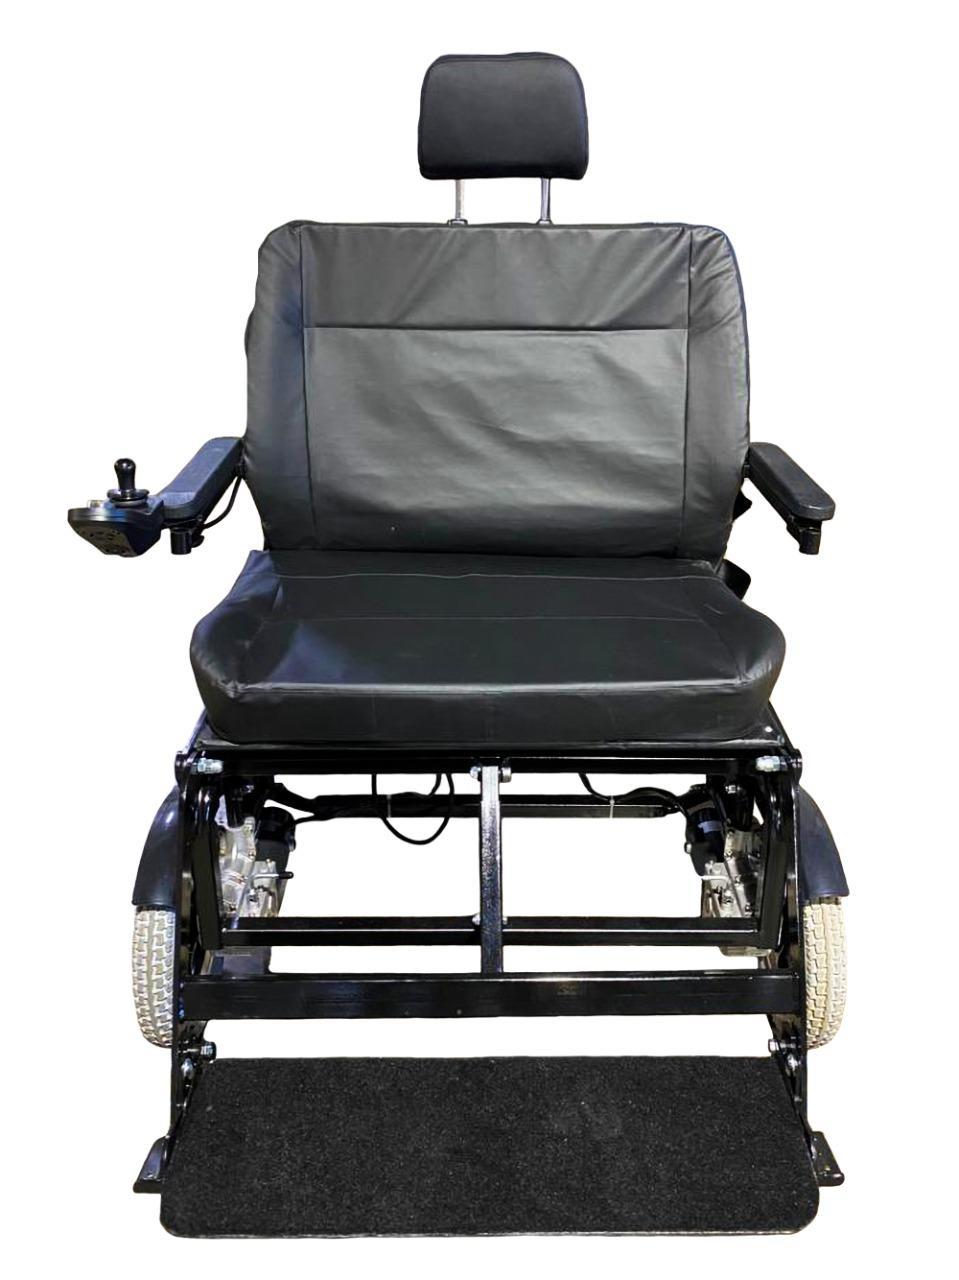 Oversize Bariatric Wheelchair, Super Wide Electric Wheelchair Heavy Duty 350kg Capacity